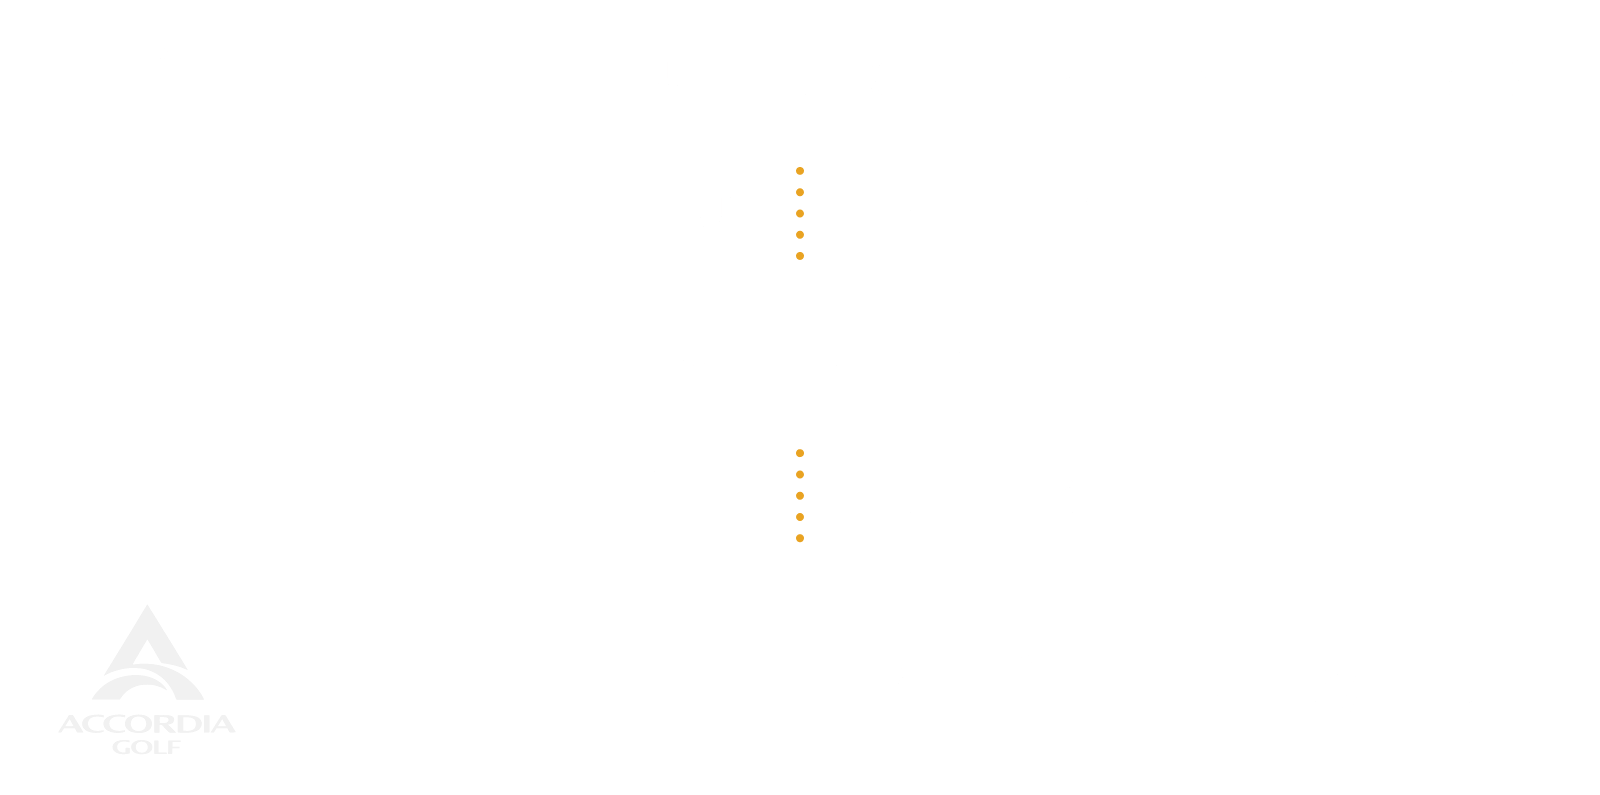 The Priority Bus